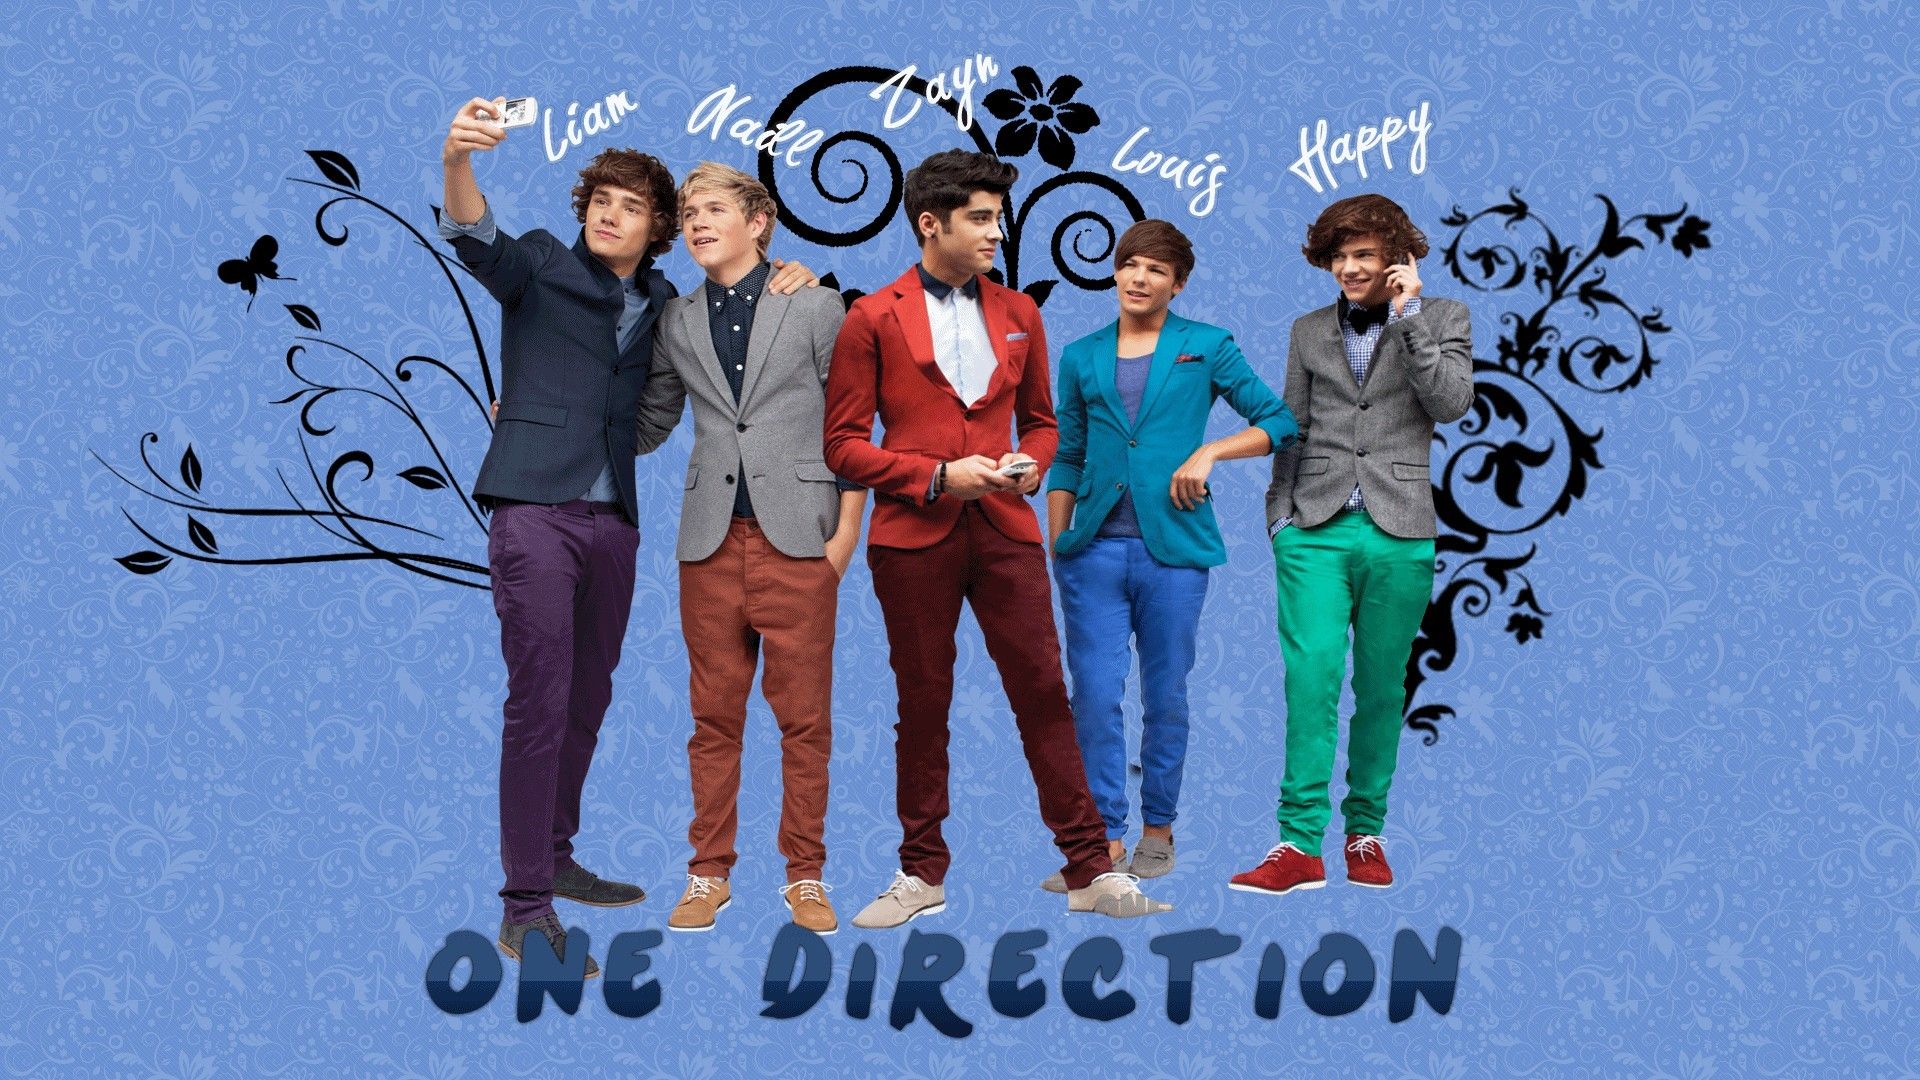 One Direction wallpaper 1920x1080 for laptop, desktop background, iPhone, Android, iPad, Tablet, etc. - One Direction